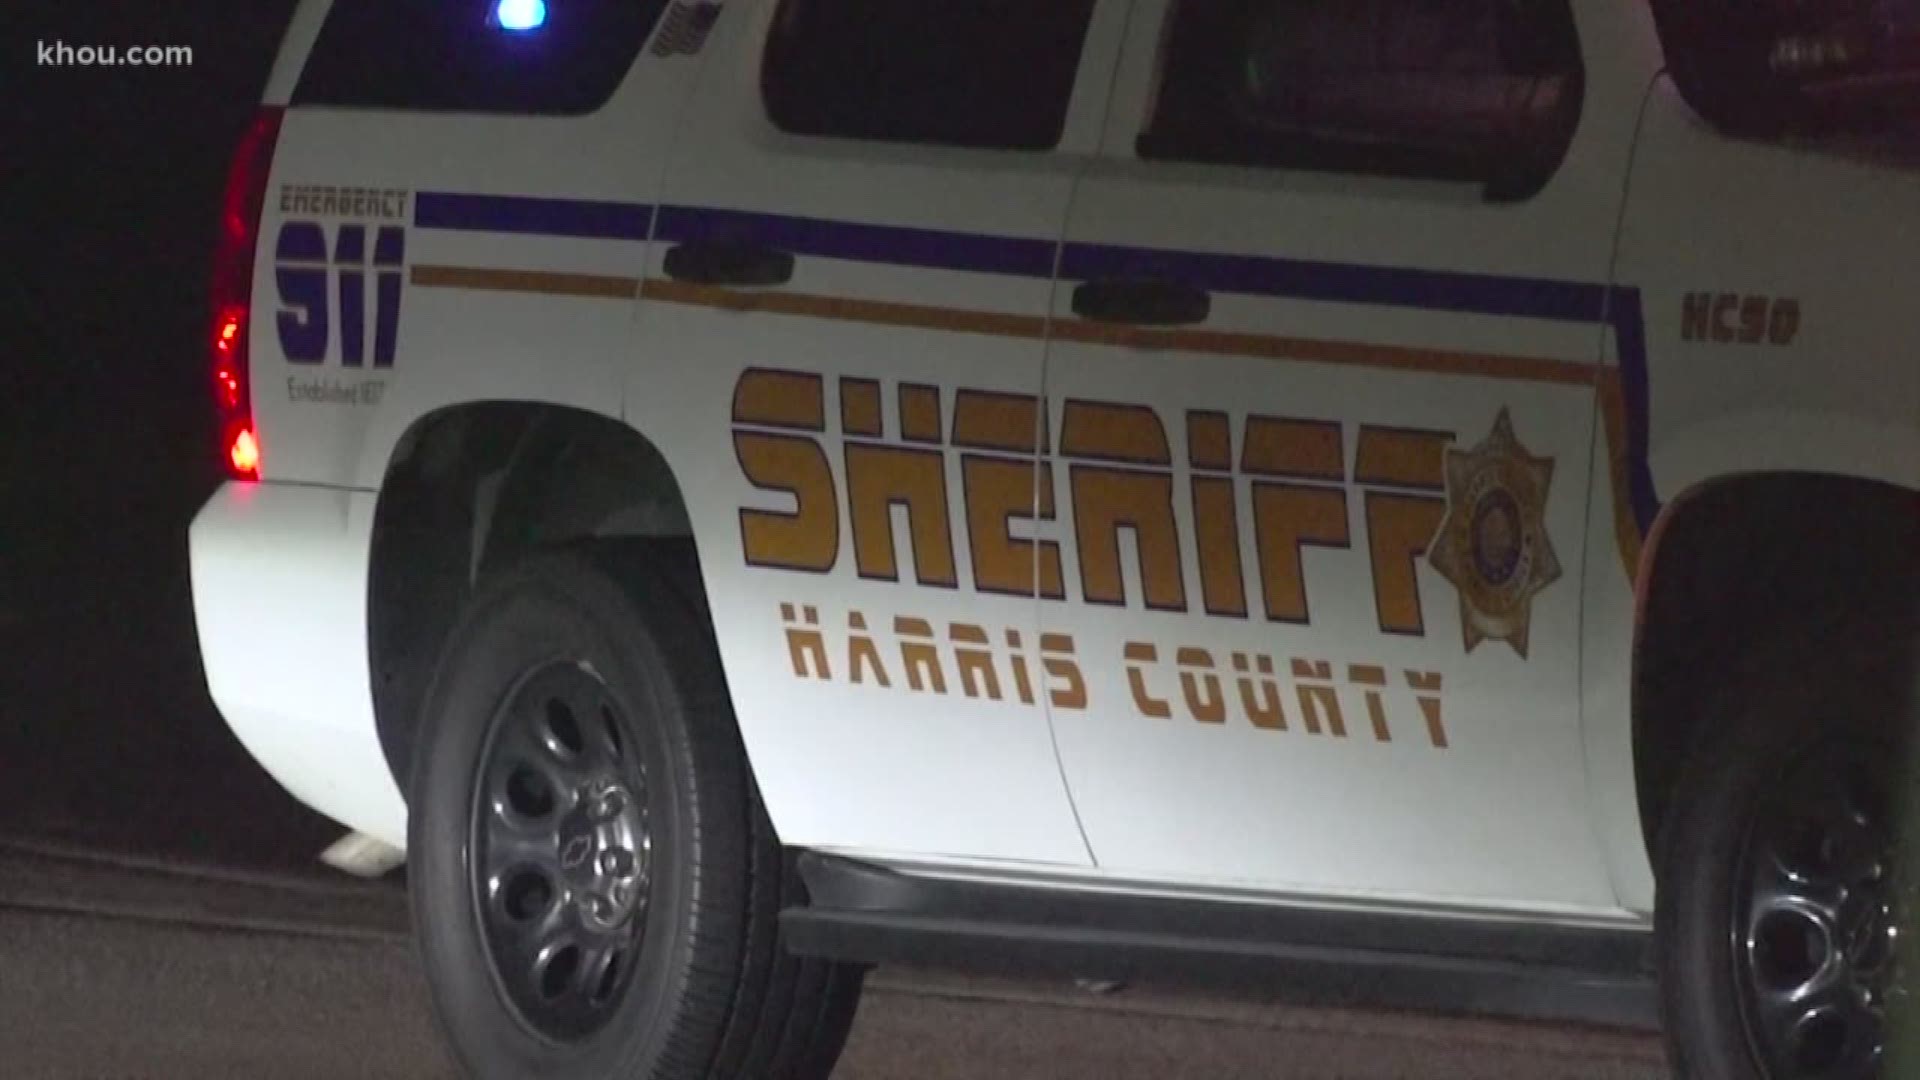 Residents in a northwest Harris County neighborhood made a grisly discovery late Sunday evening, according to the sheriff’s office.